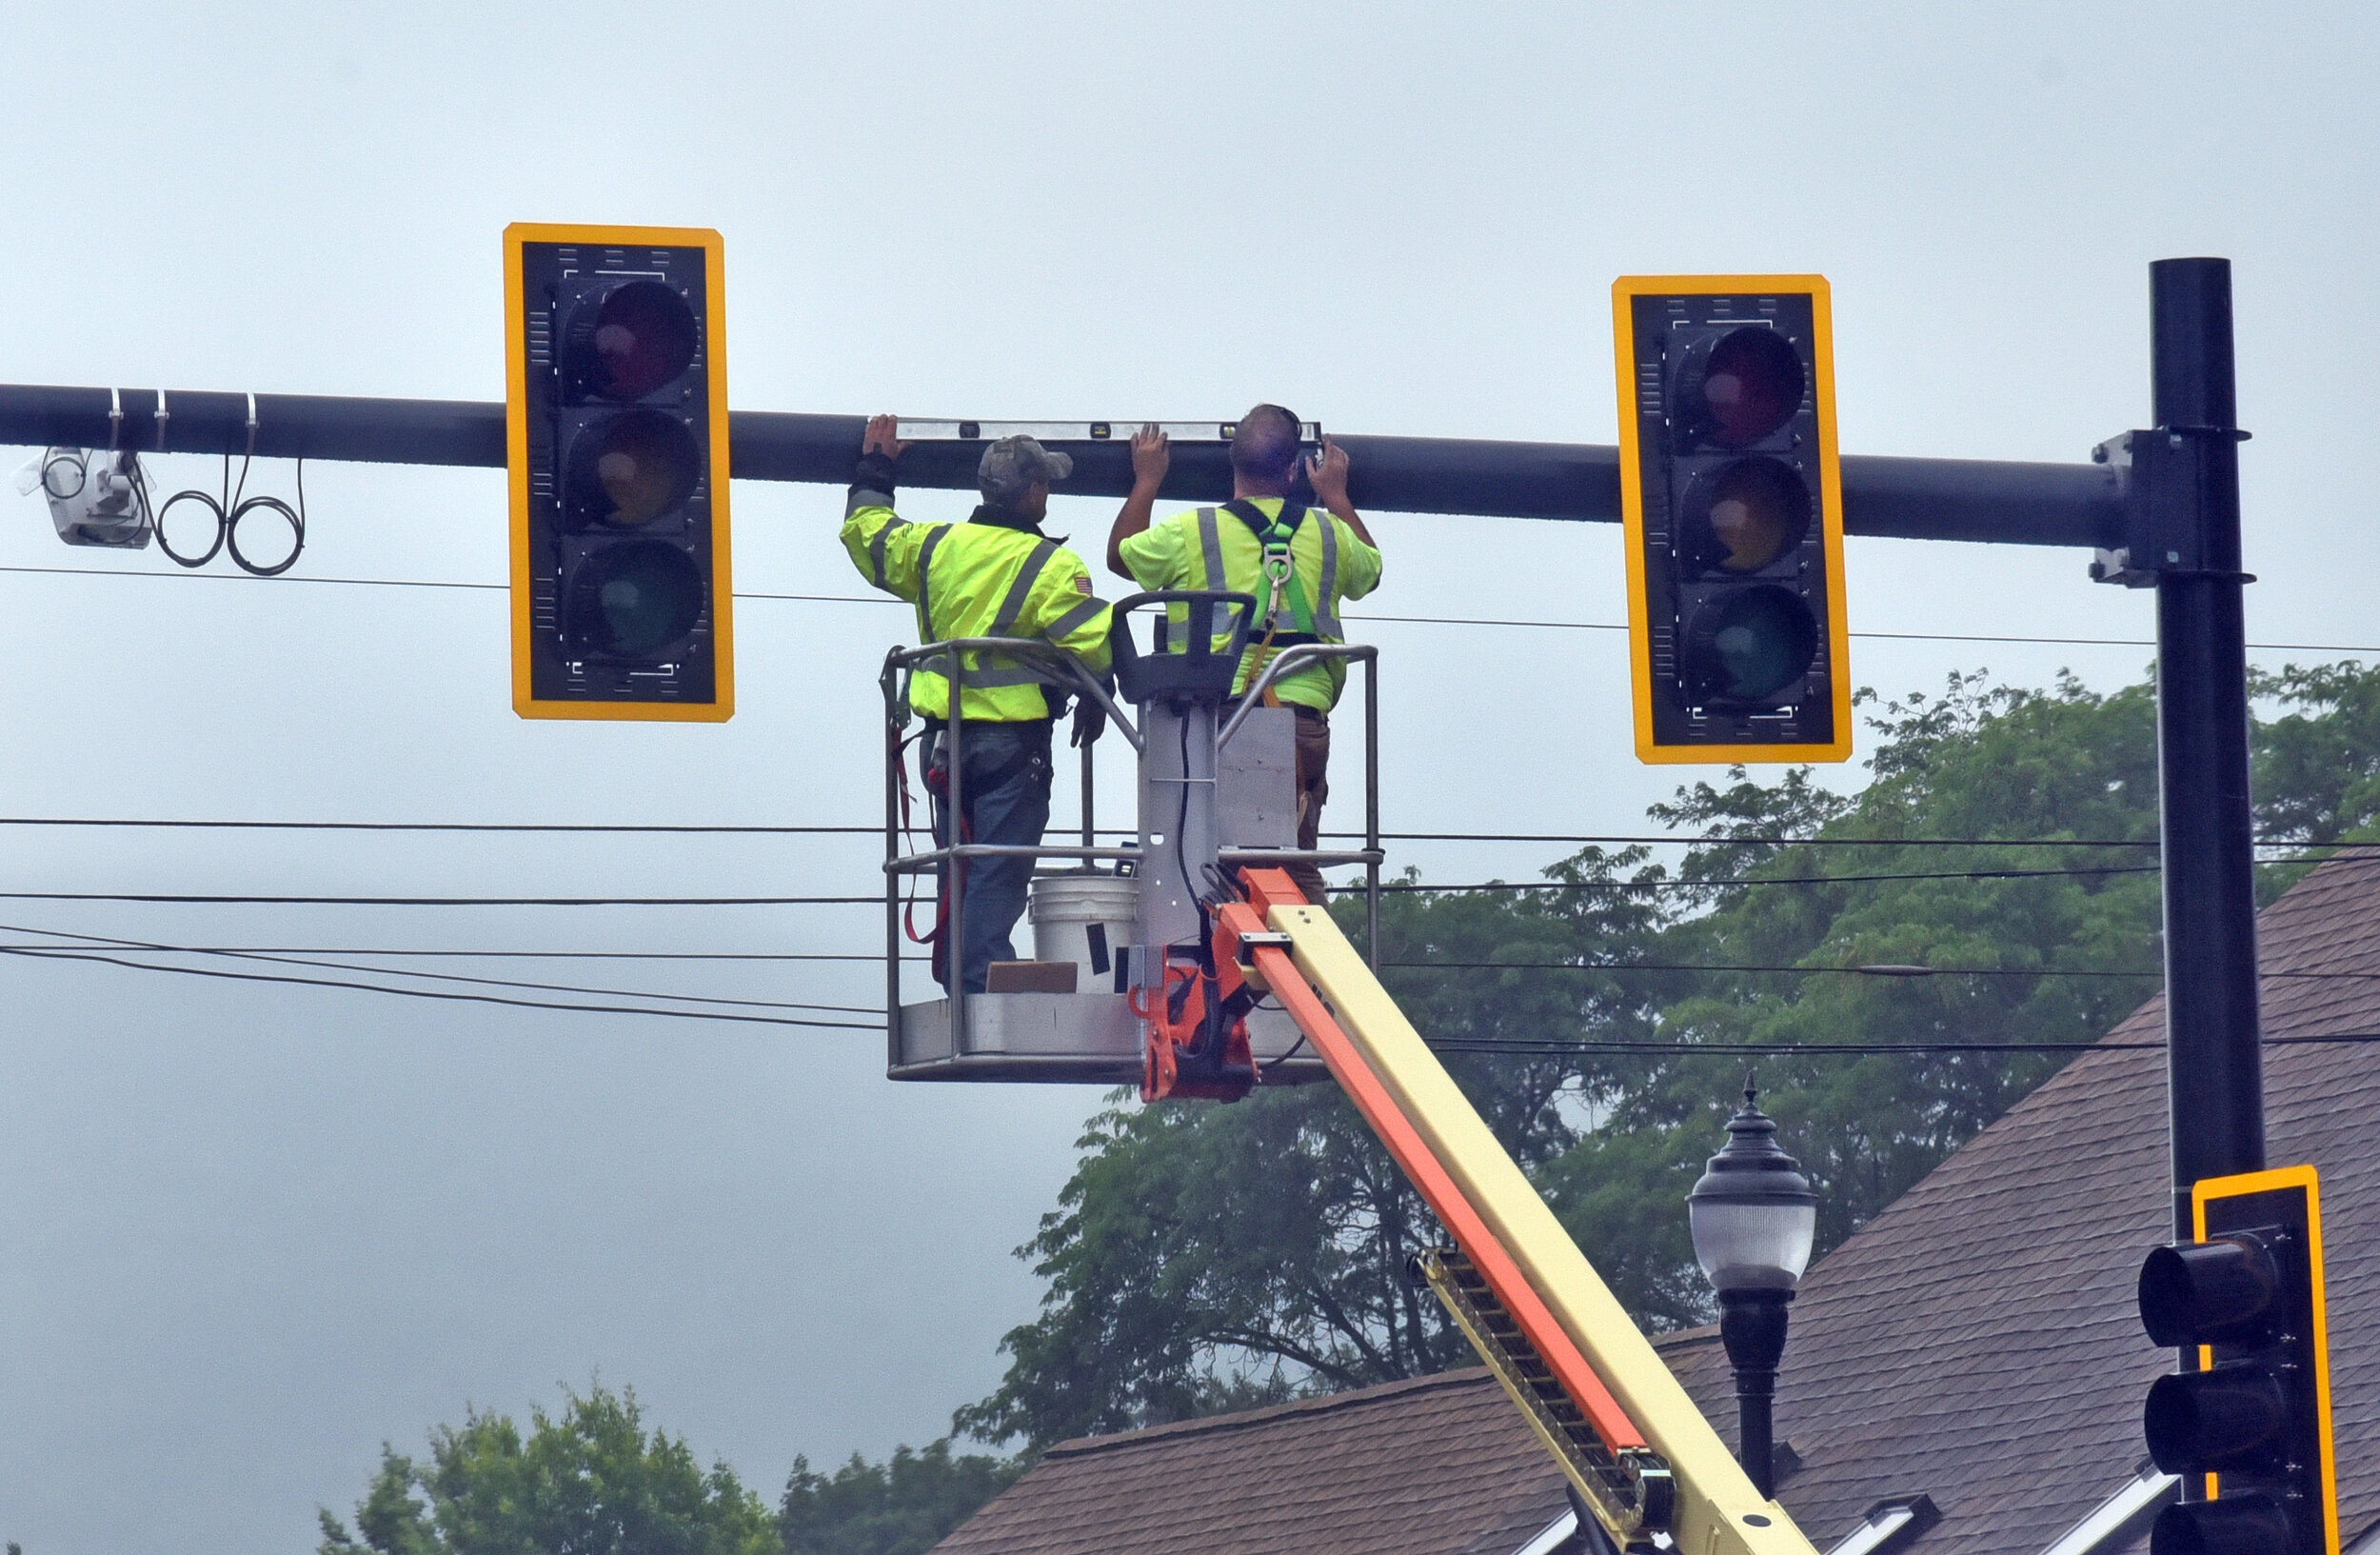   The new signal at Main and Winooski Streets has a turning arrow. Photo by Gordon Miller  